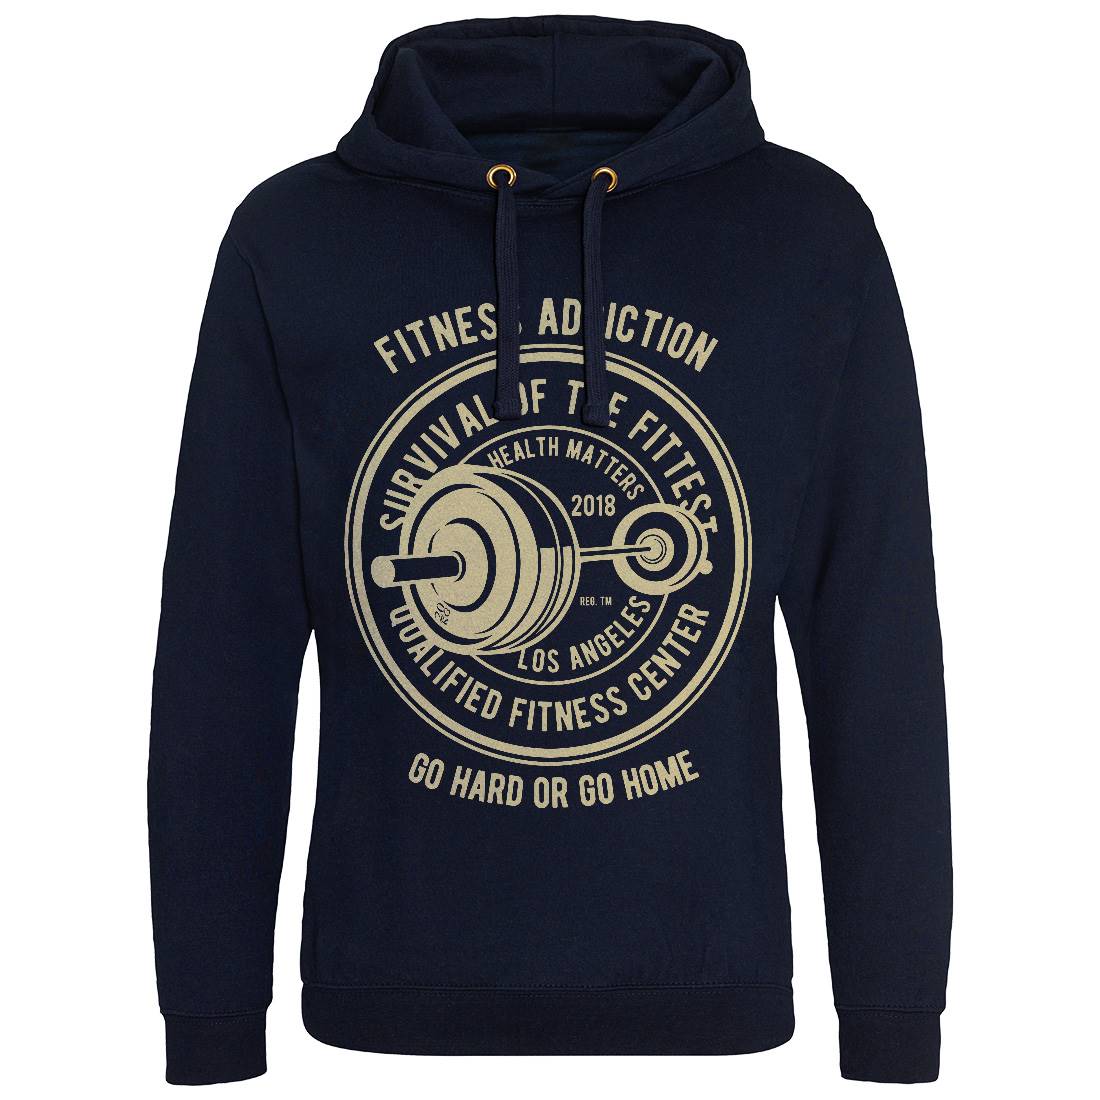 Fitness Addiction Mens Hoodie Without Pocket Gym B403